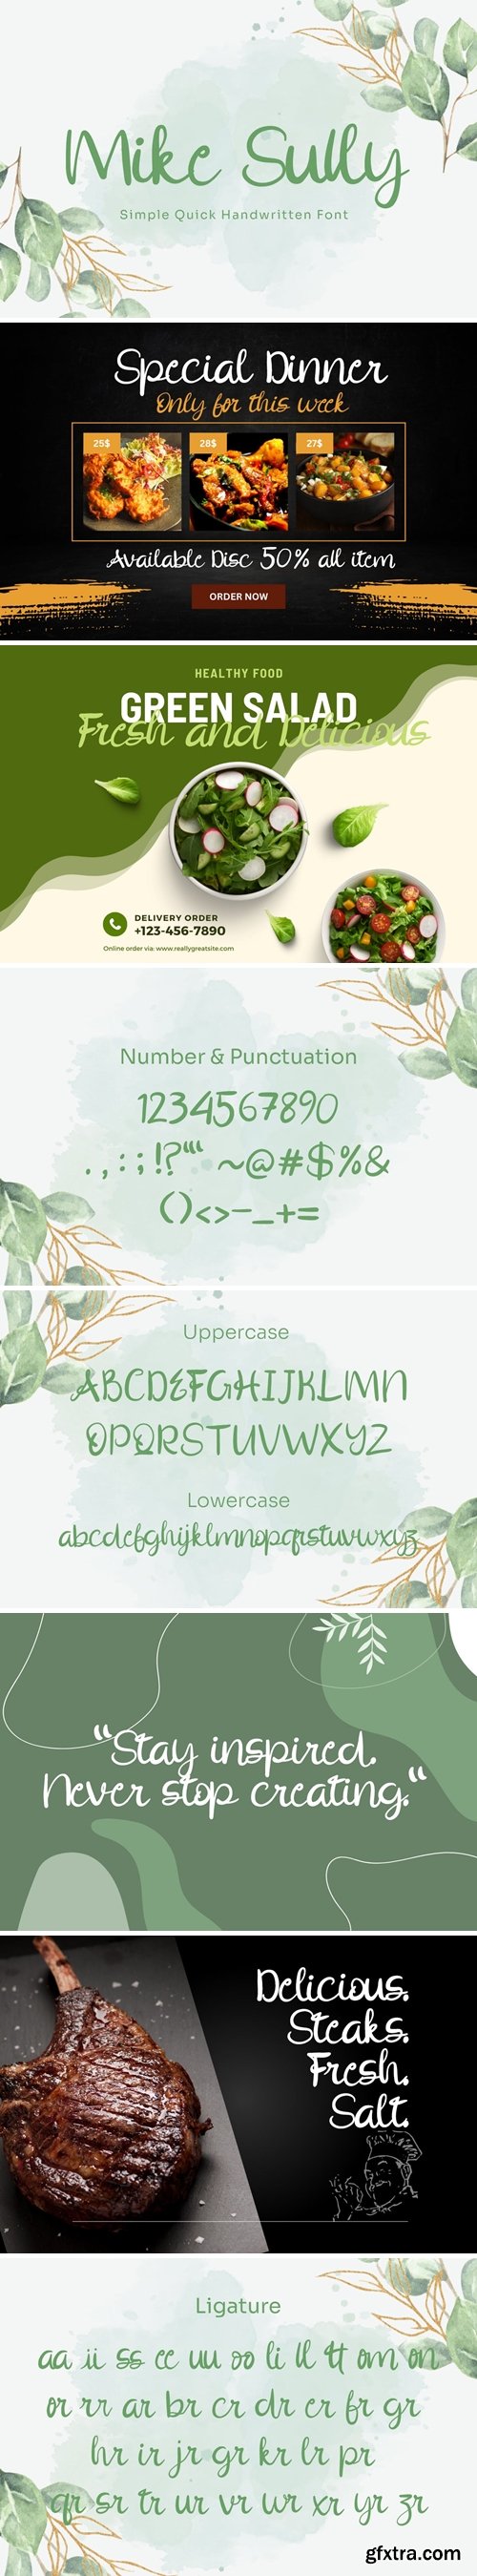 Mike Sully - Handwritten Font